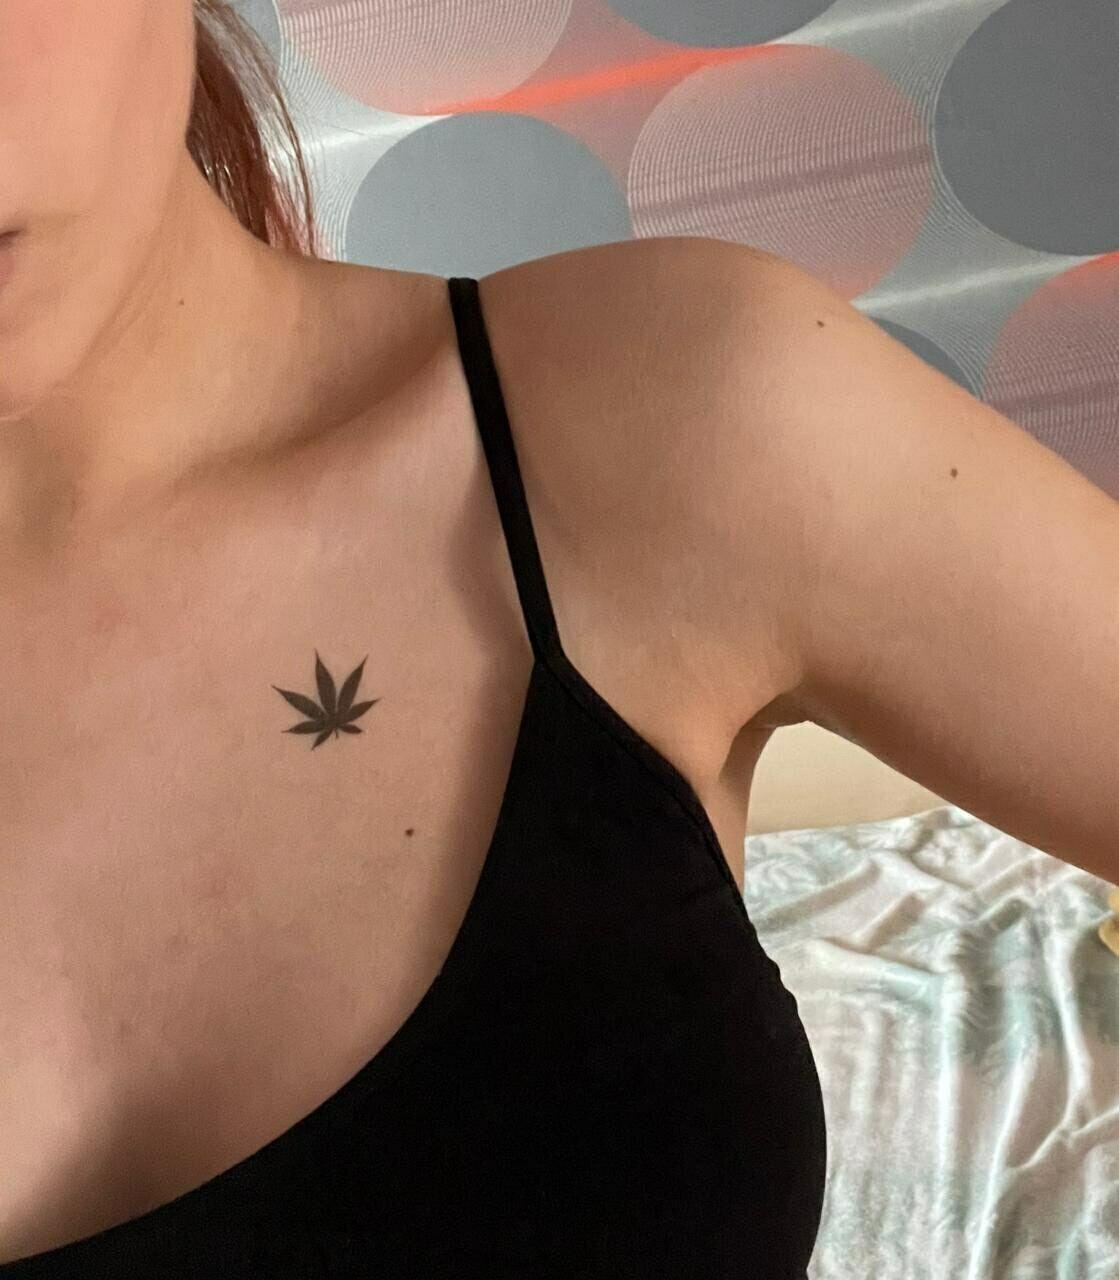 Top 7 Weed Inspired Tattoos You Should See